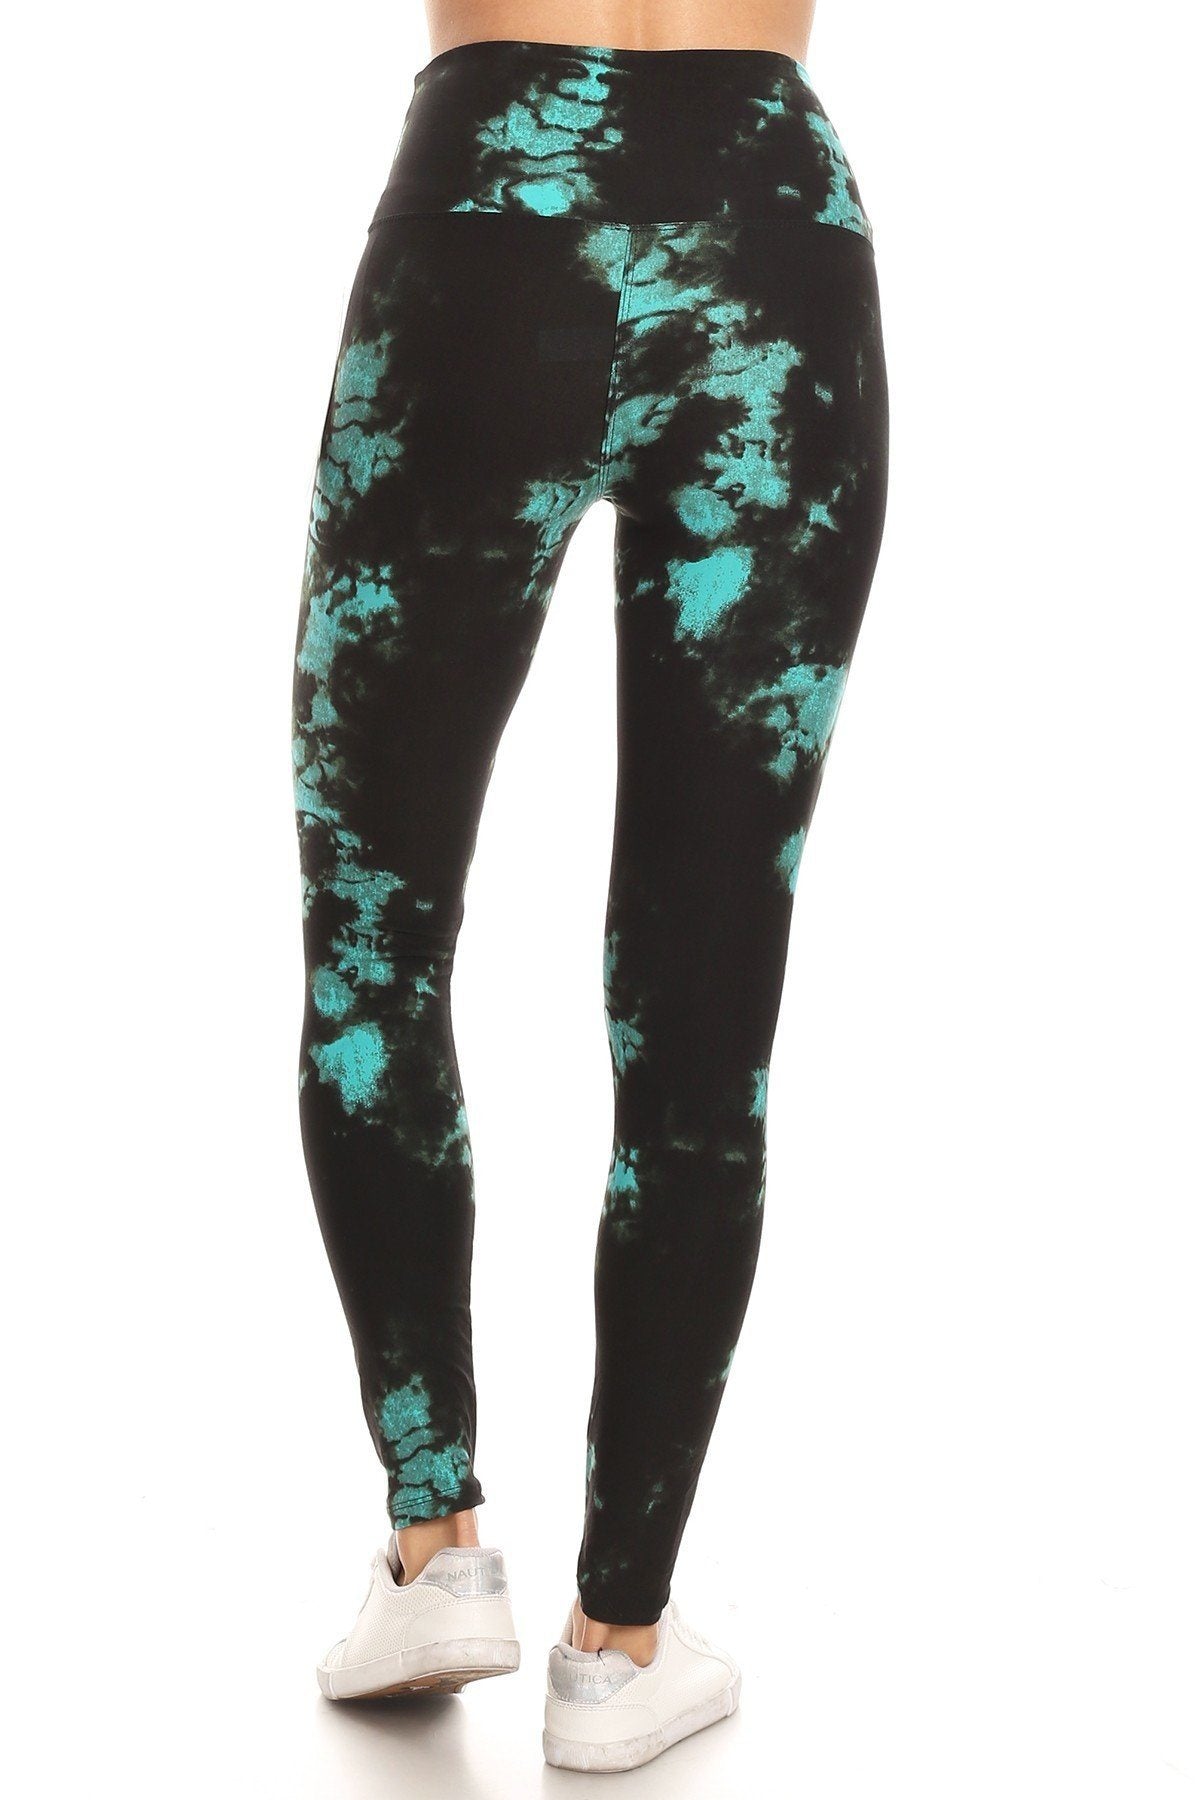 5-inch Long Yoga Style Banded Lined Tie Dye Printed Knit Legging With High Waist 5-inch Long Yoga Style Banded Lined Tie Dye Printed Knit Legging With High Waist - M&R CORNER M&R CORNER